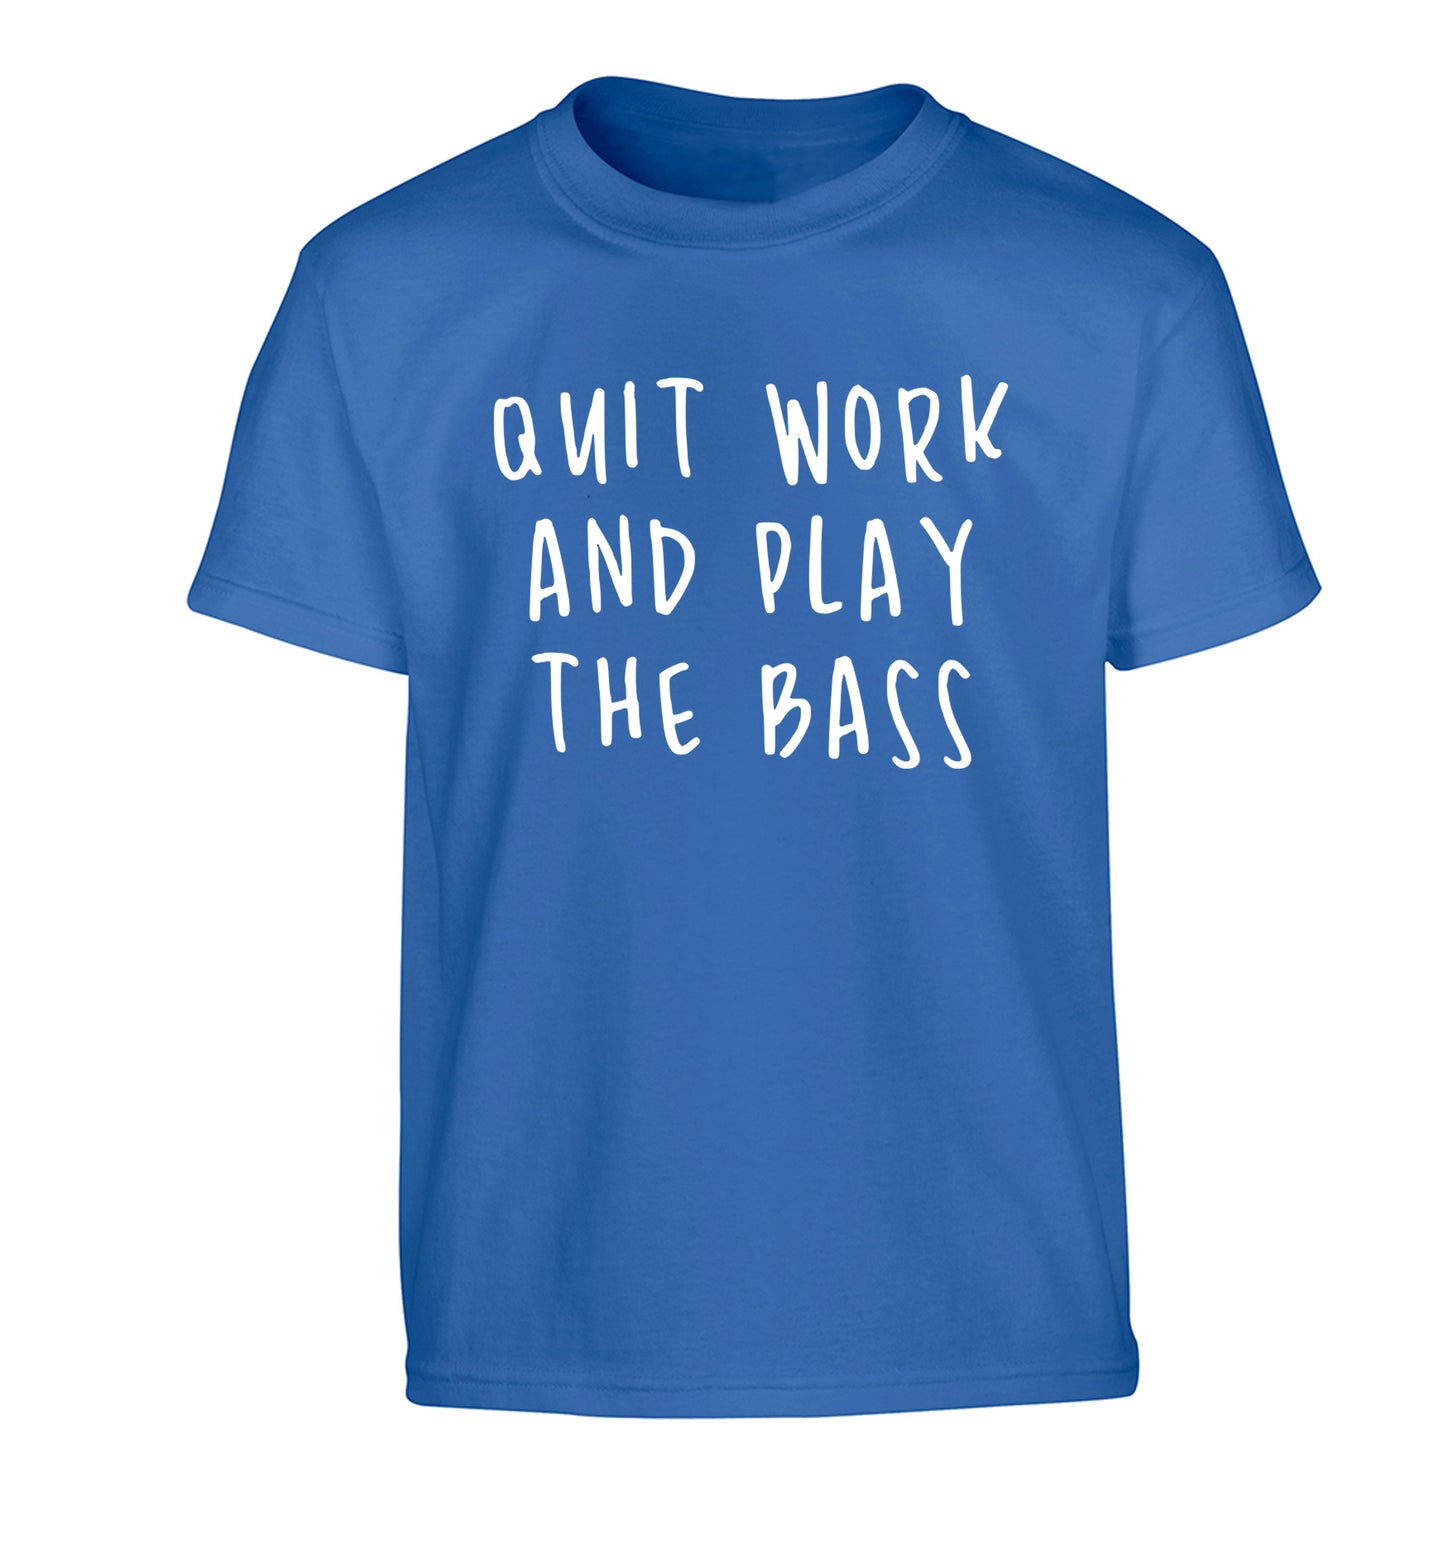 Quit work and play the bass Children's blue Tshirt 12-14 Years